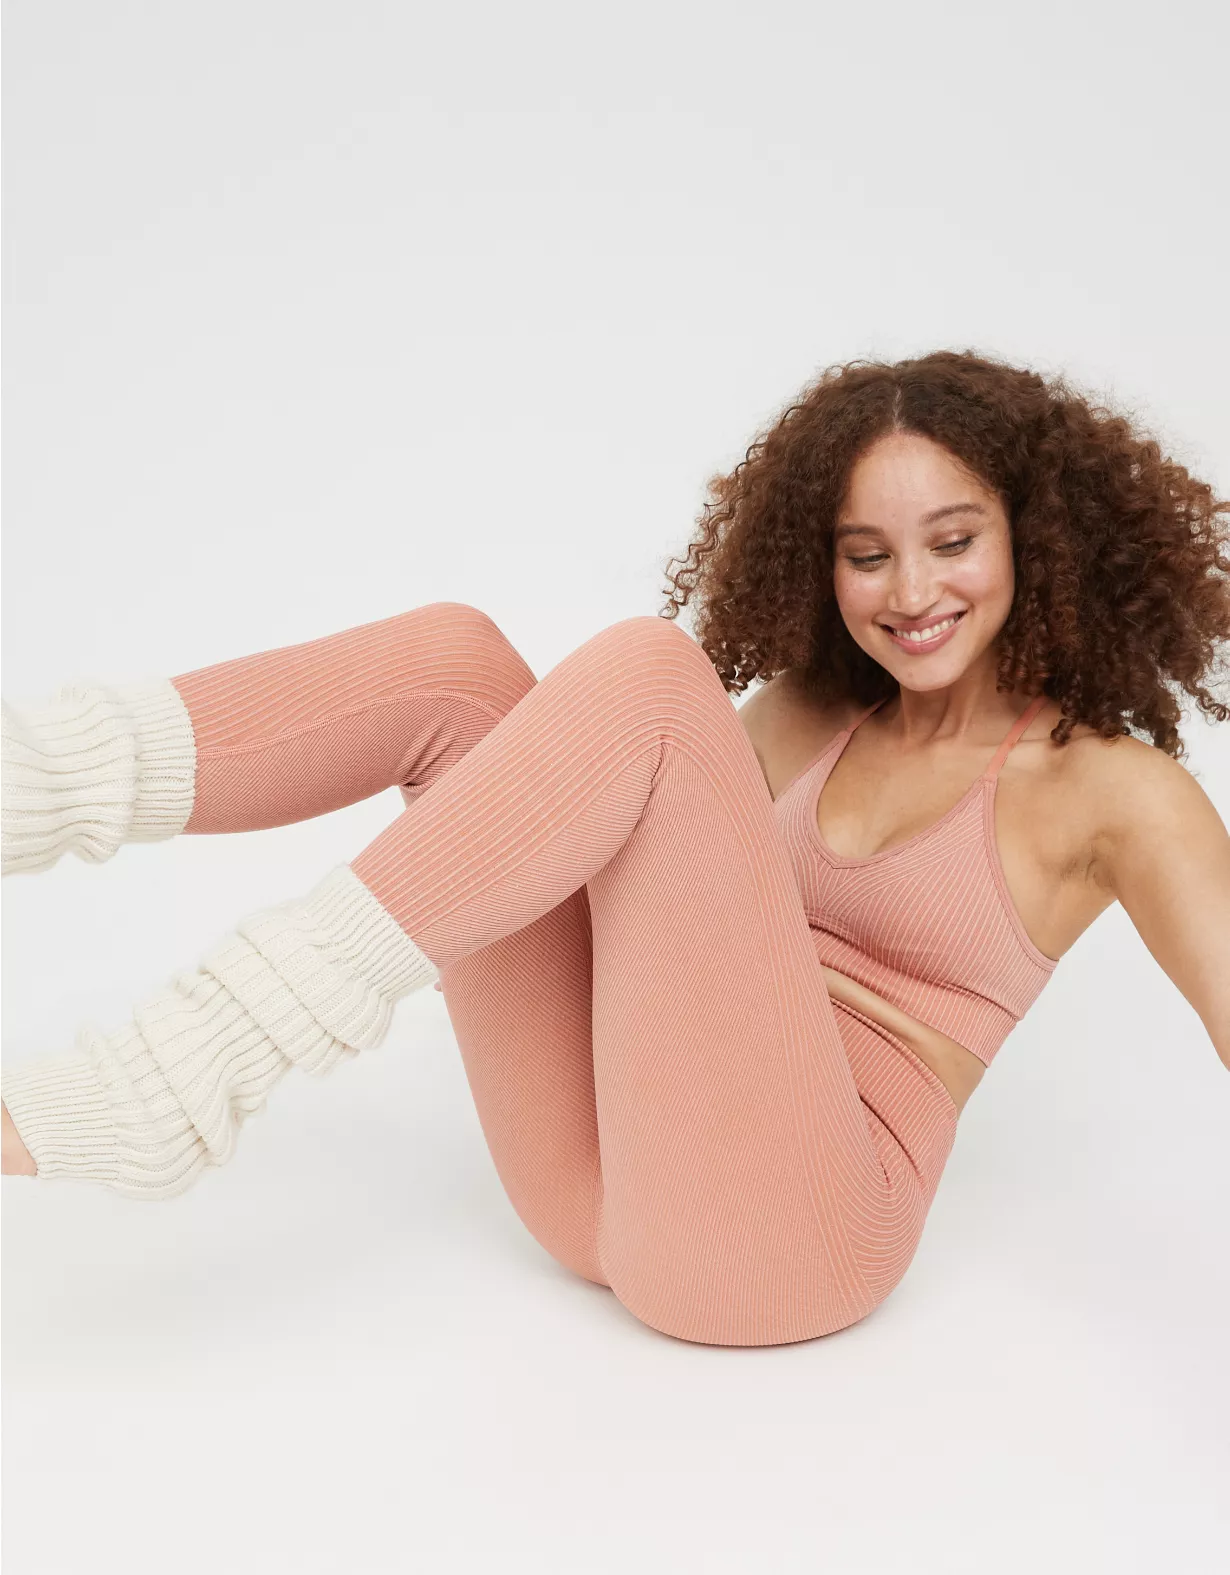 OFFLINE By Aerie Seamless Washed Rib High Waisted Legging